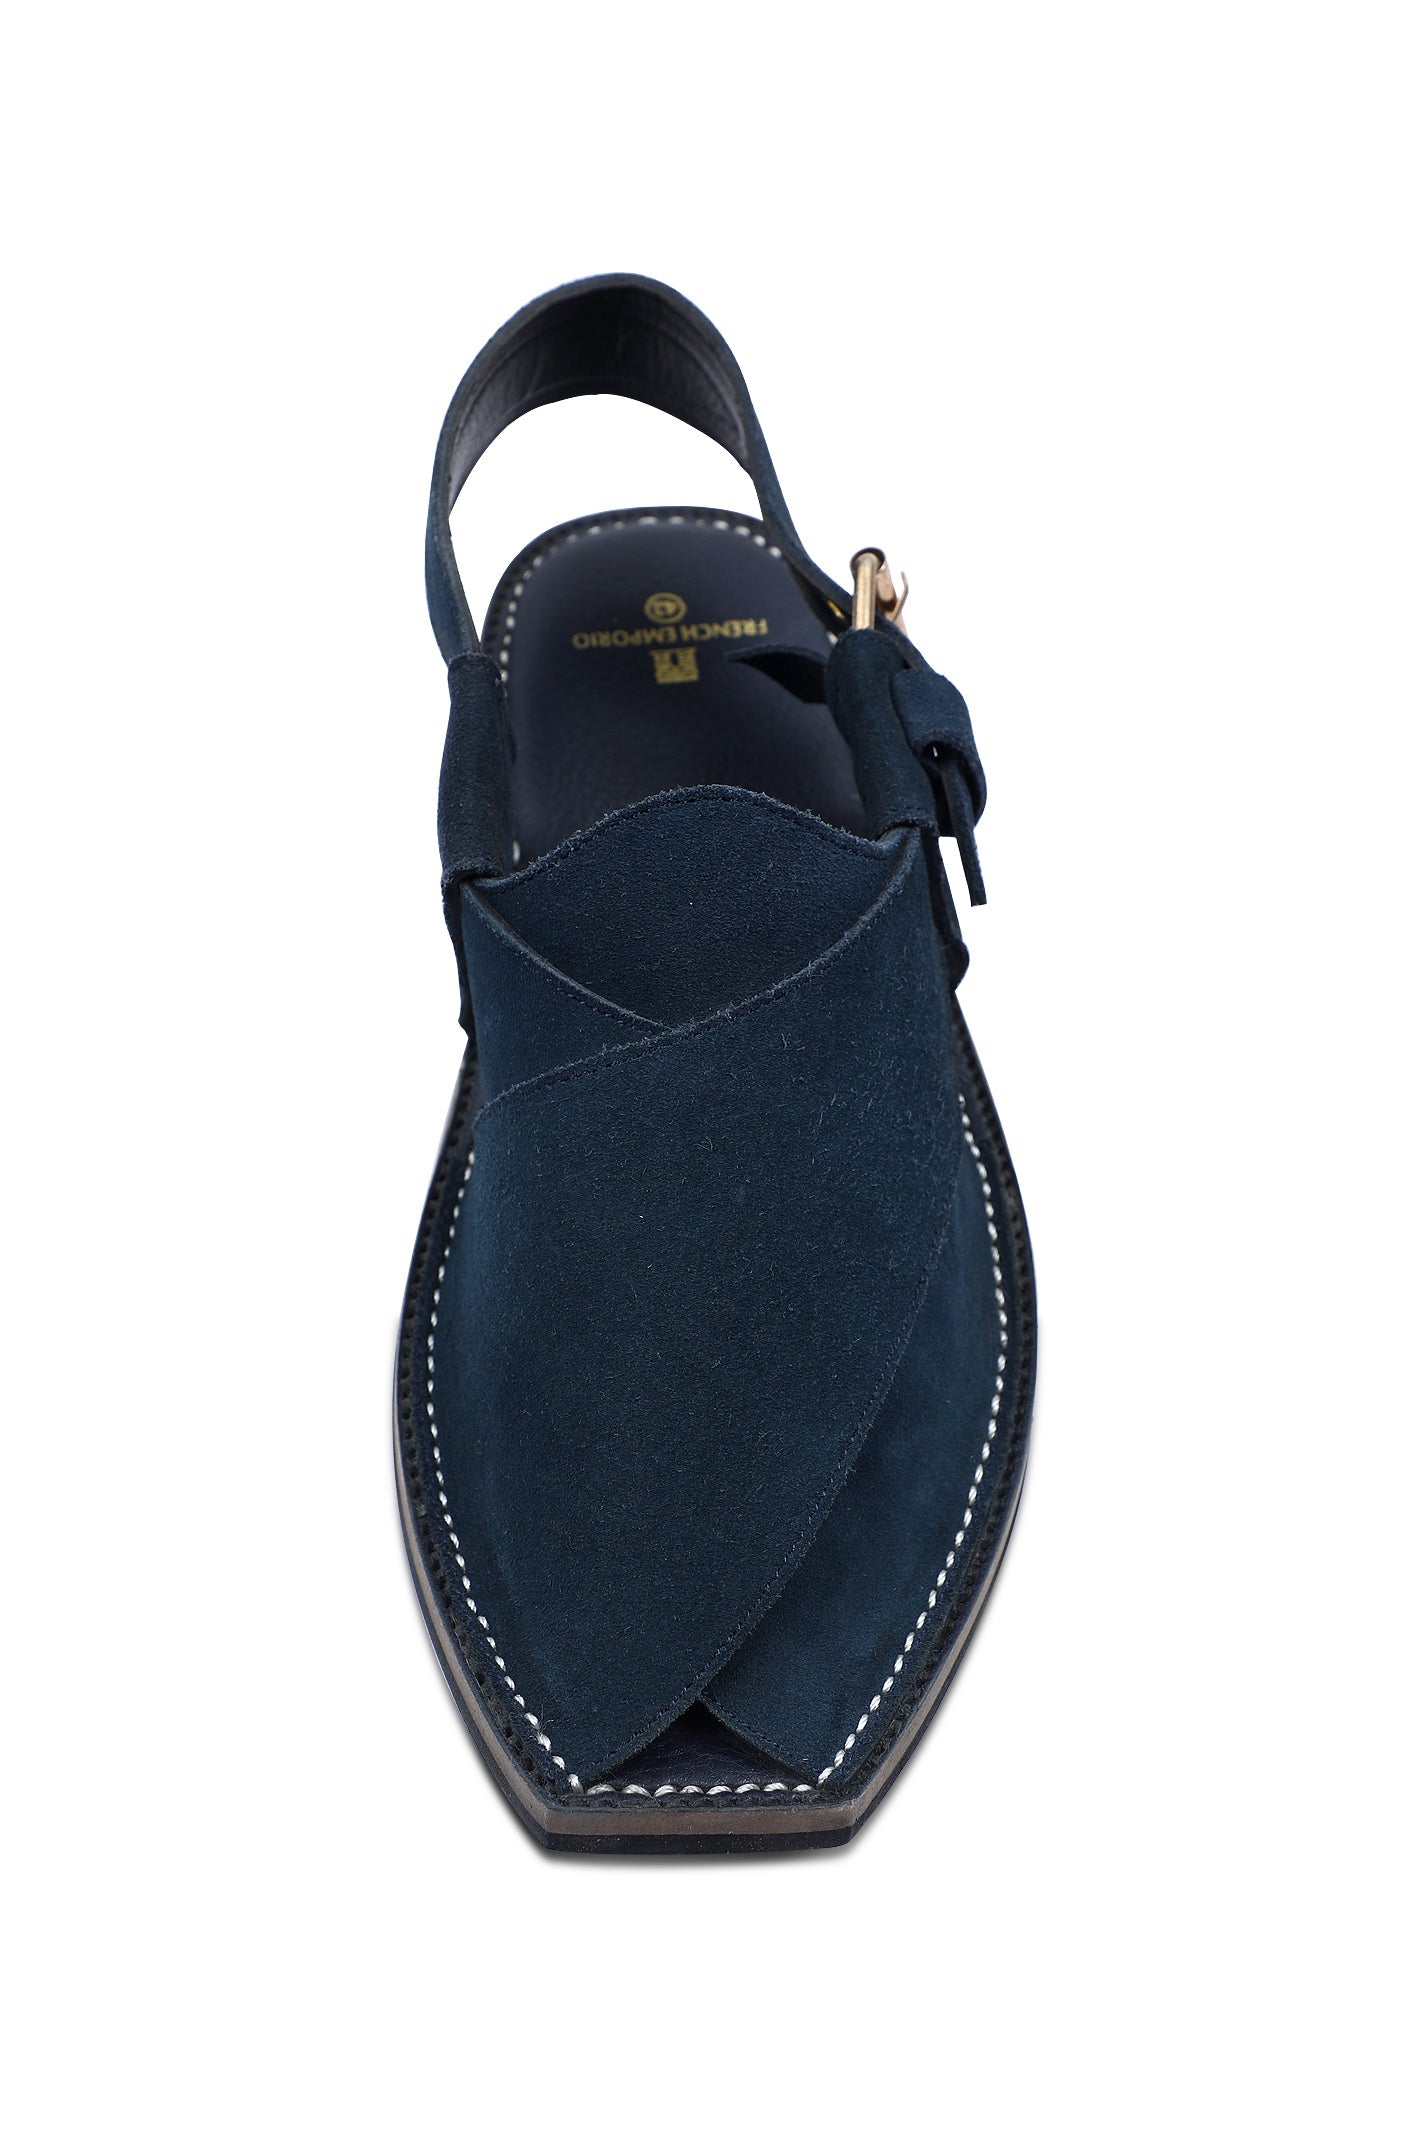 French Emporio Men Sandals SKU: PSLD-0037-NAVY - Diners